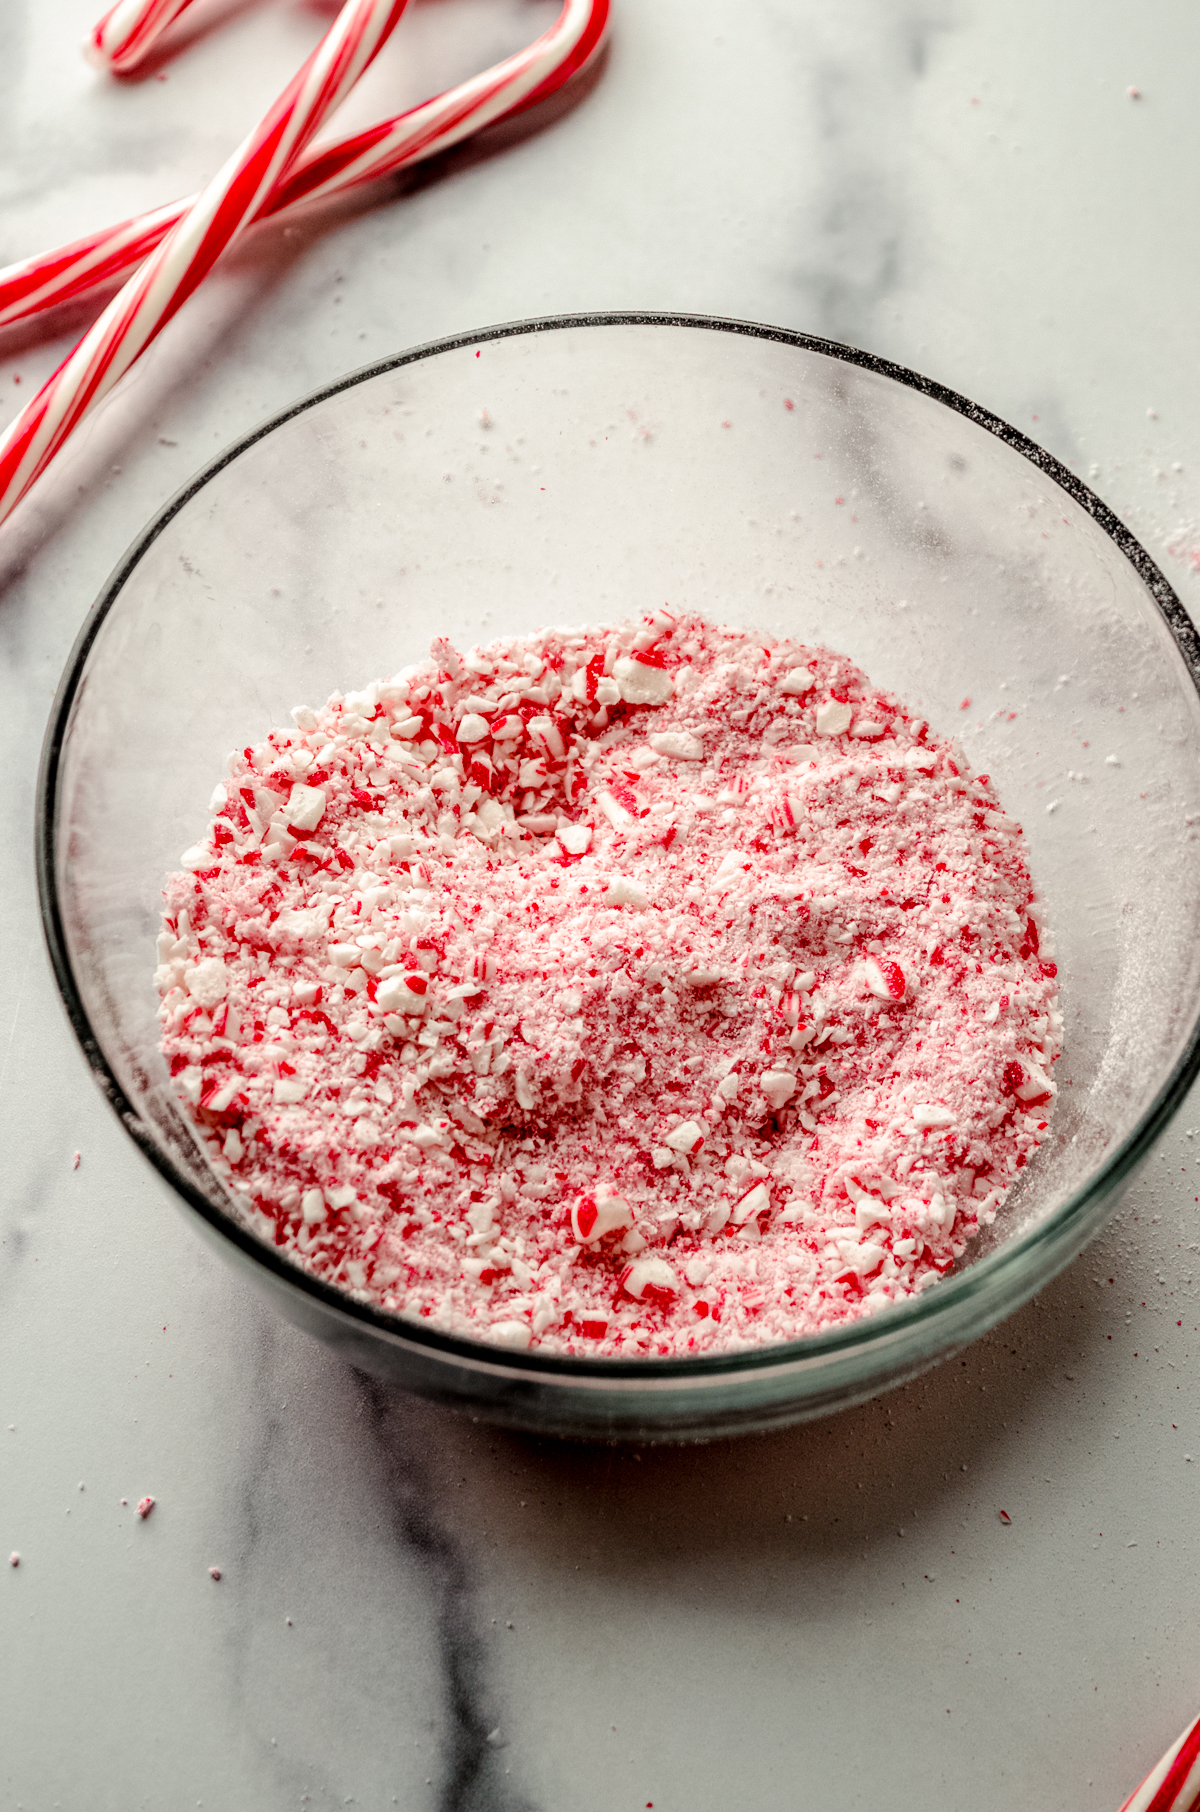 A bowl of crushed candy canes.